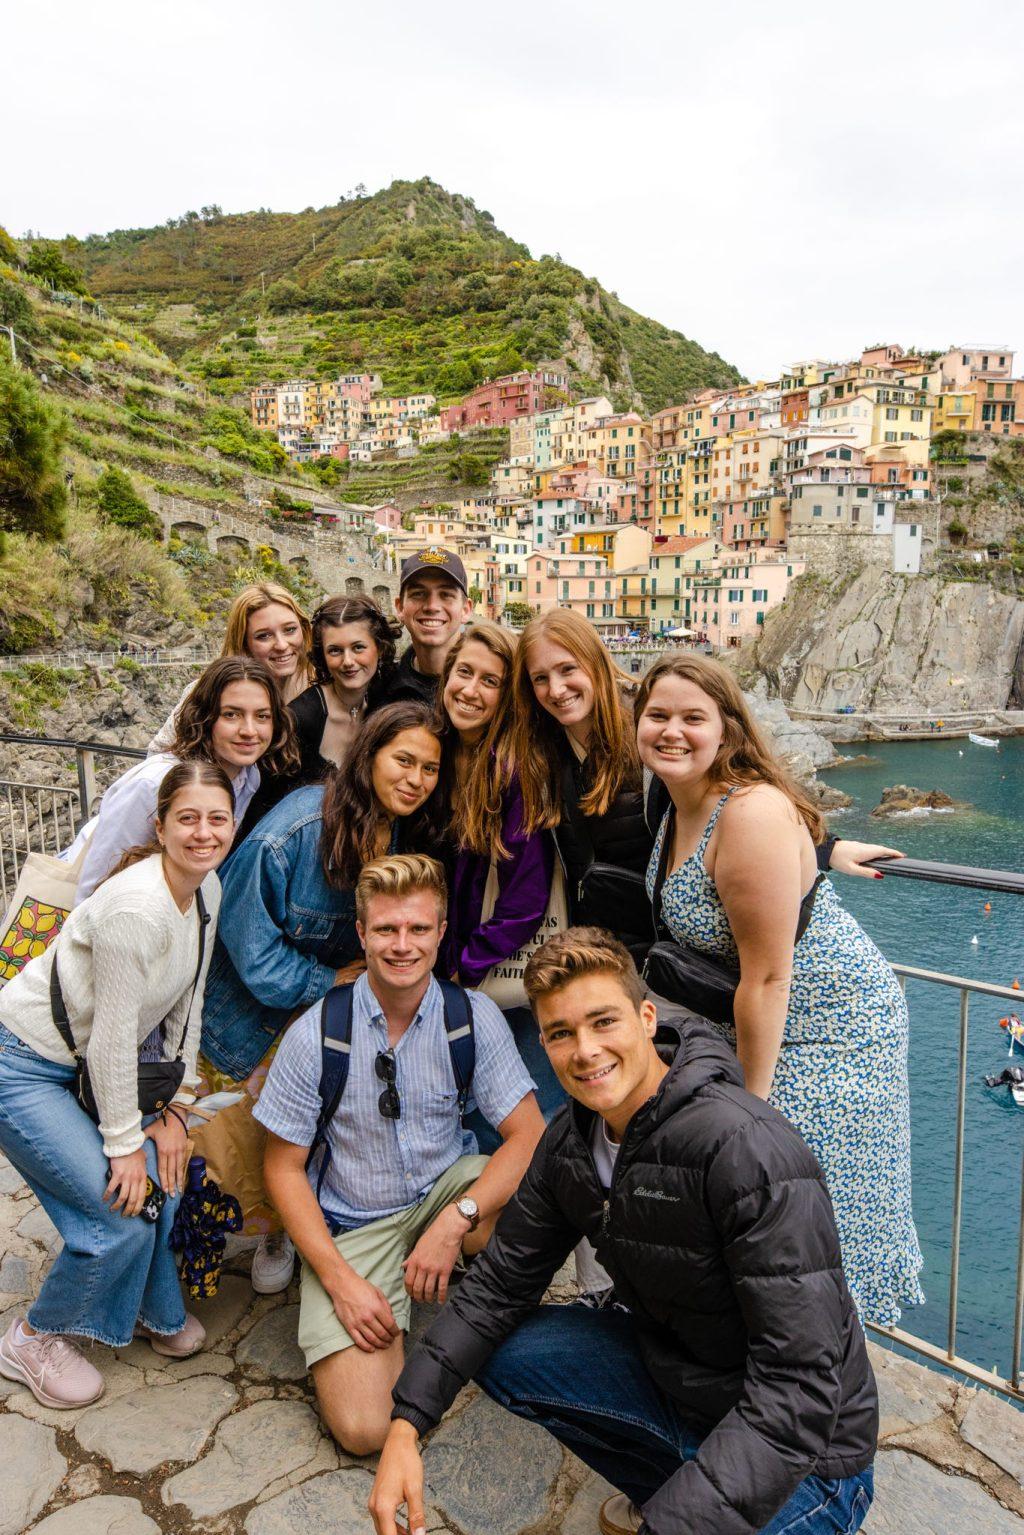 D'Andrea poses in front of the seaside village of Manerola with a group of Florence summer 2023 students in Cinque Terre, Italy on May 20. Cinque Terre translates to Five Lands, and students took a ferry boat to see each port.